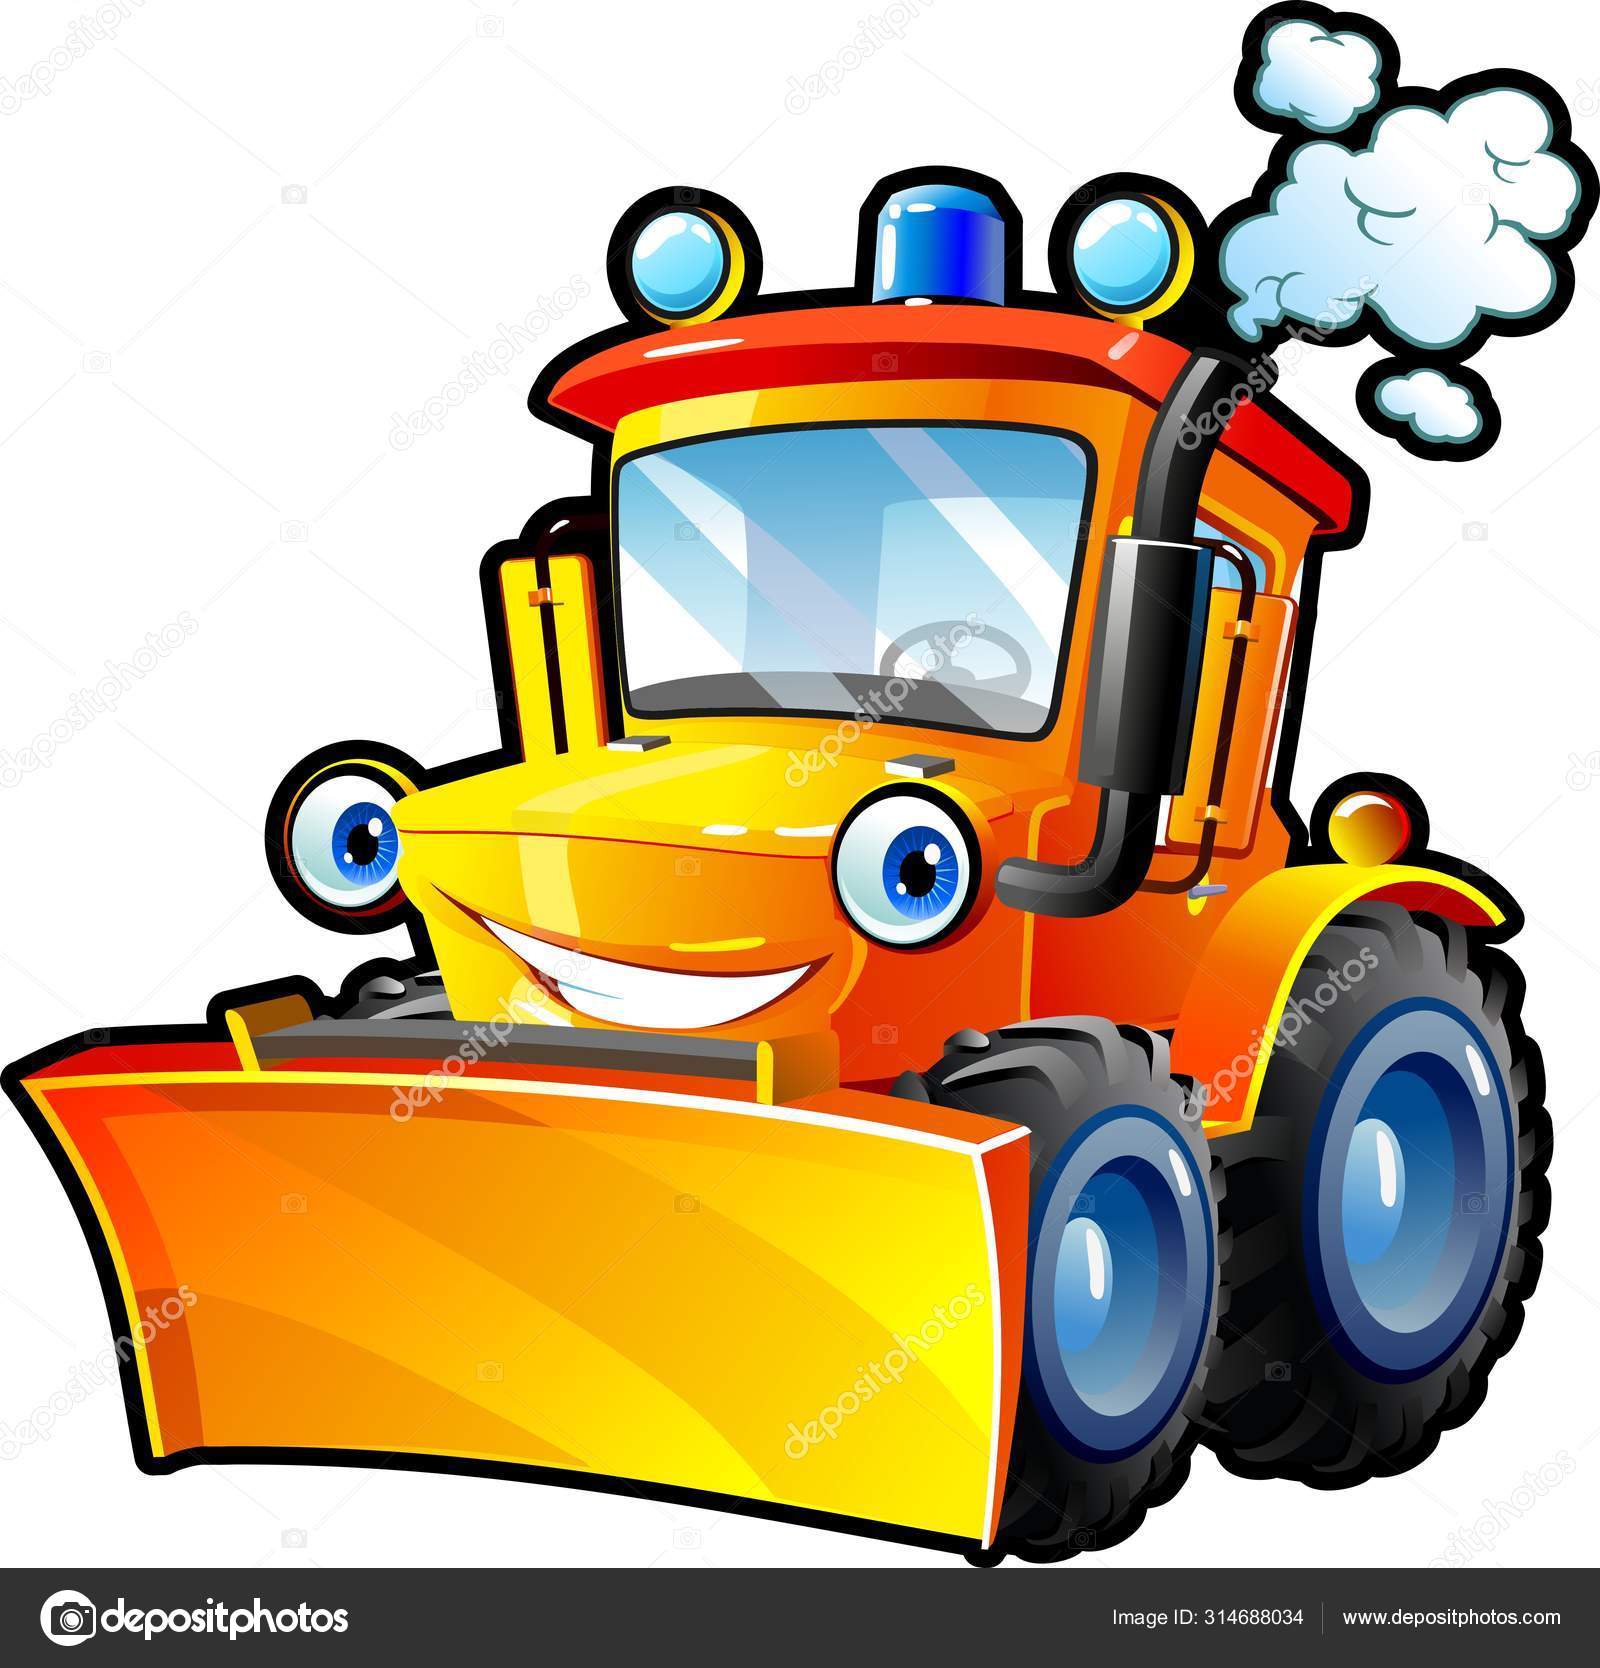 Cheerful Cartoon Tractor Blue Eyes Stock Vector Image by ©VitD #314688034